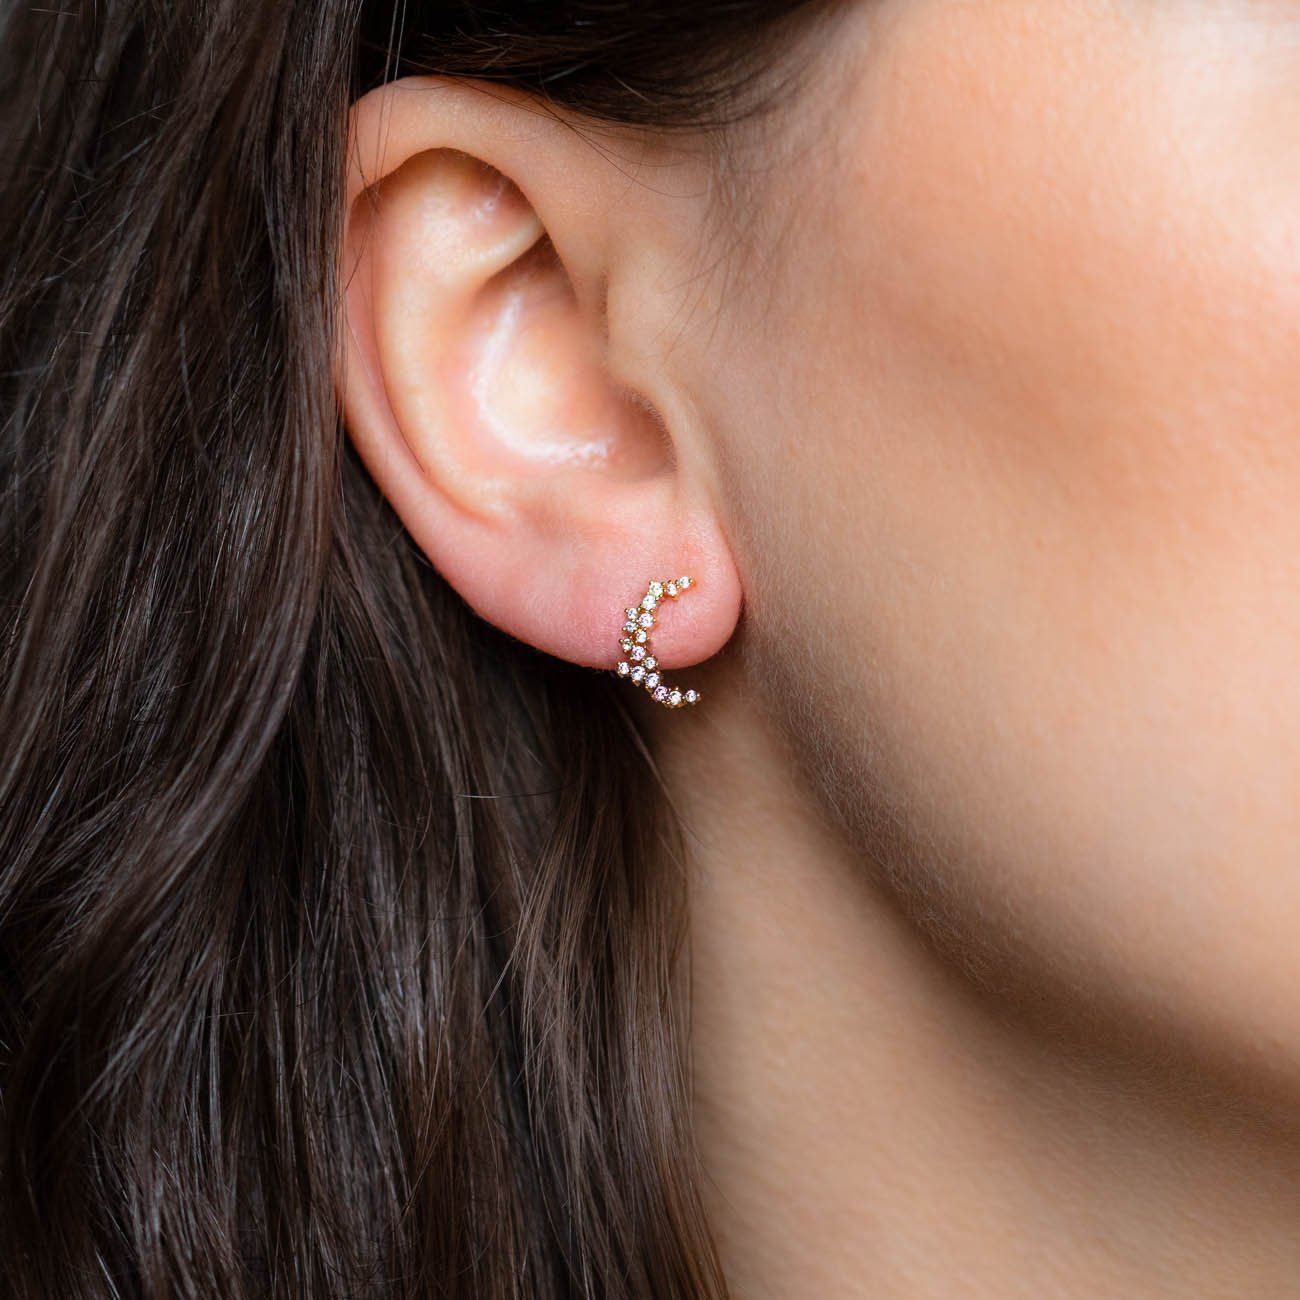 Local Eclectic One and Only Crescent Moon Stud Earrings on Ear